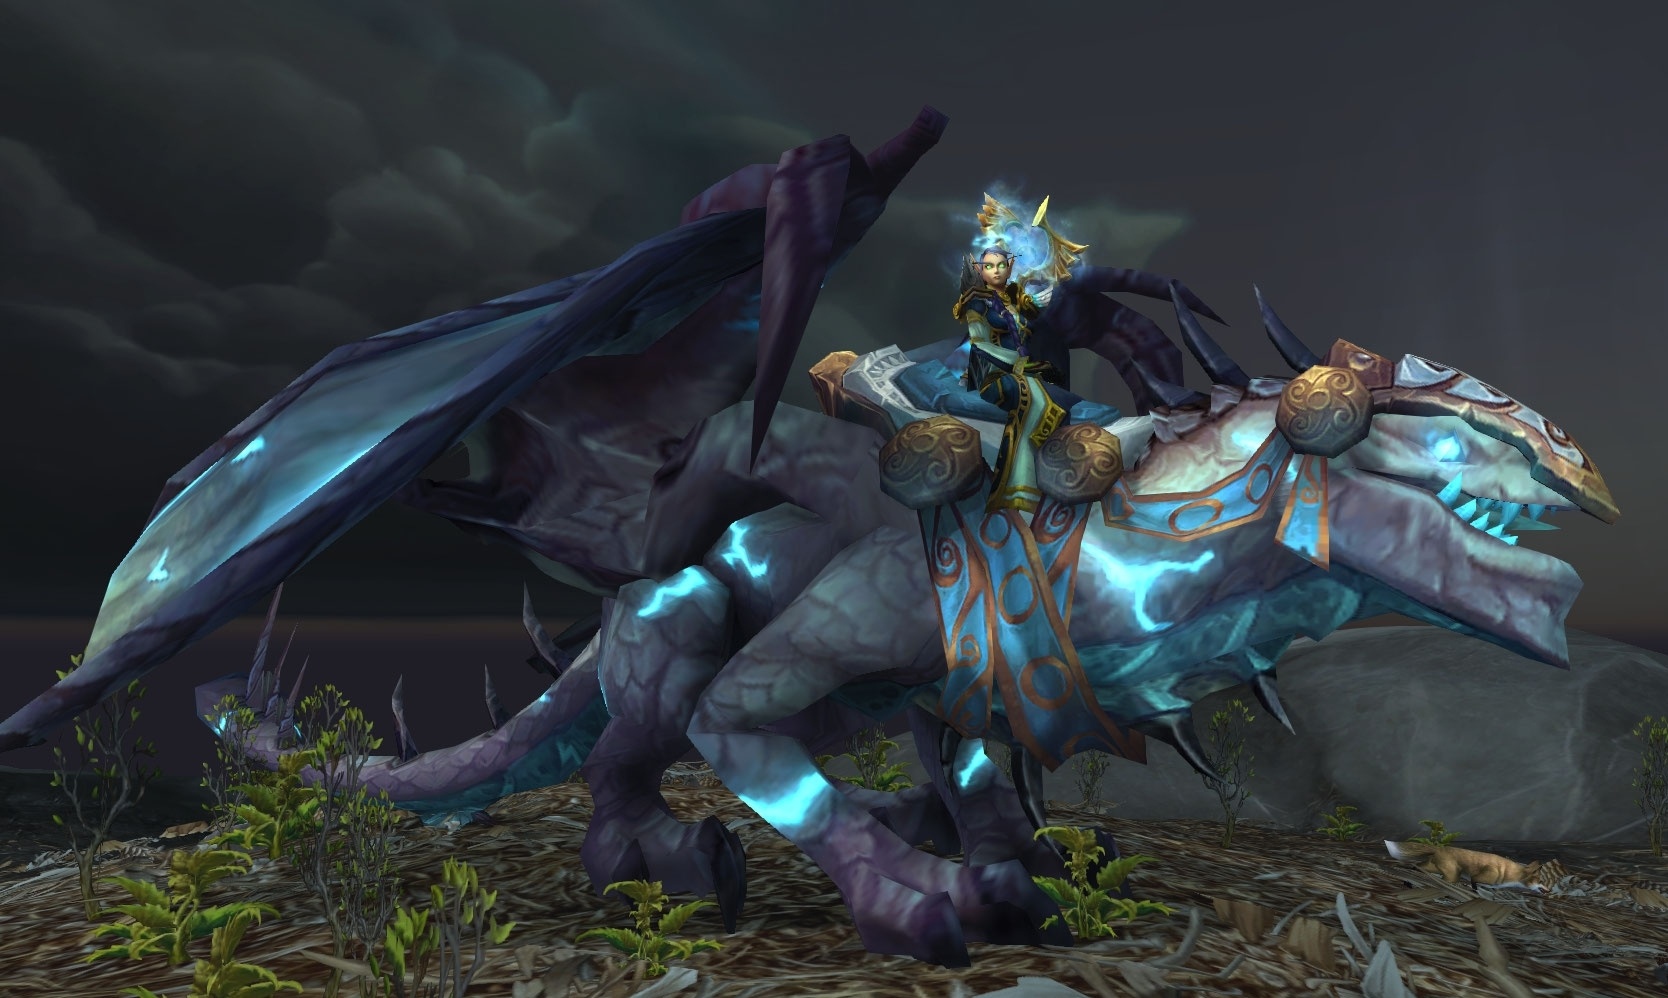 Reins of the Drake of the North Wind - Item - World of Warcraft